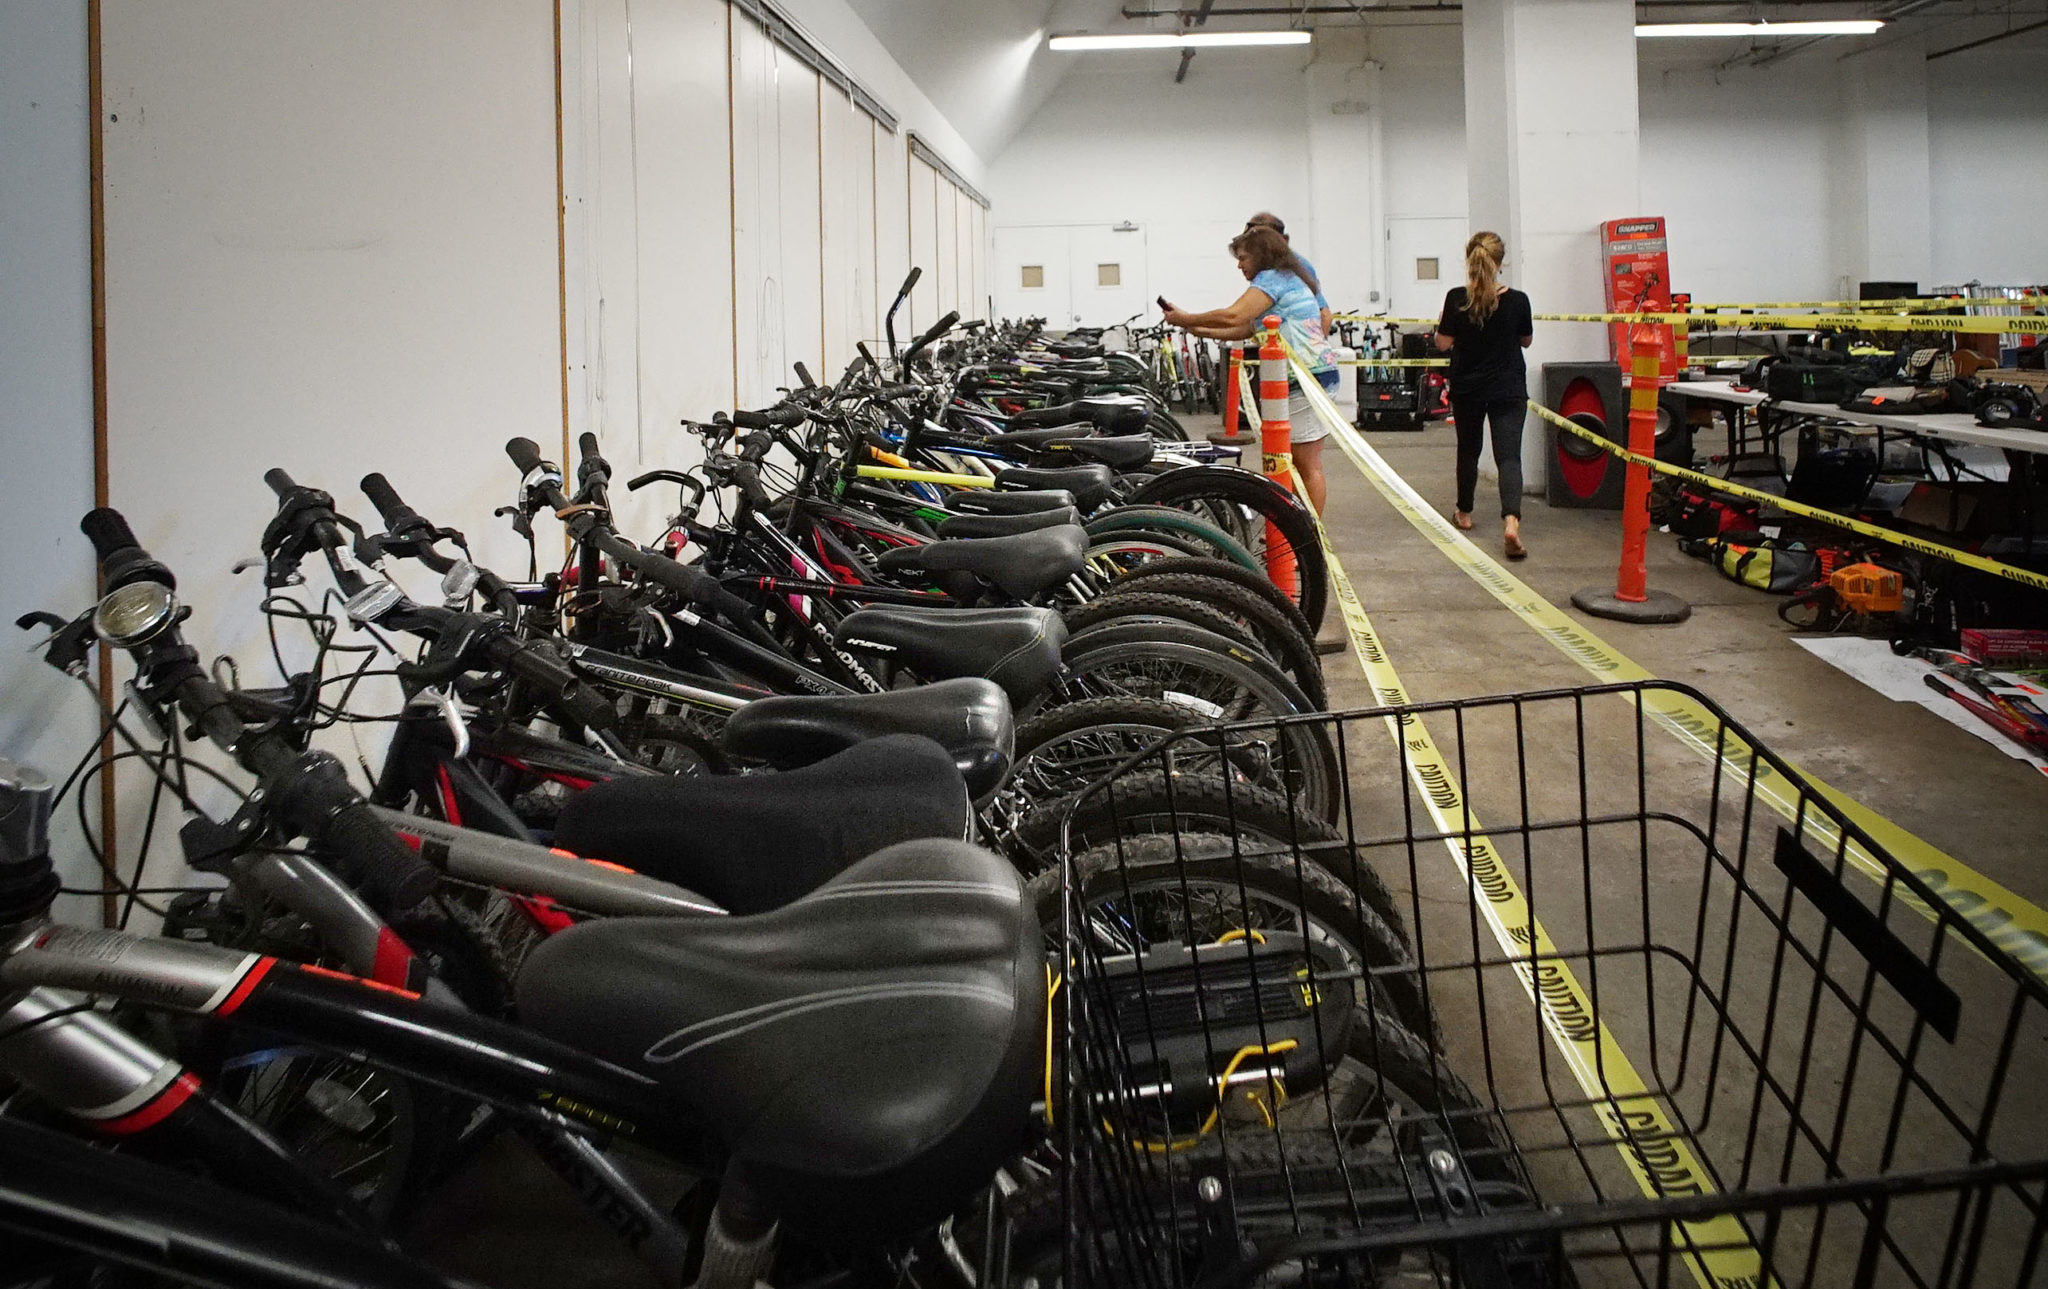 Hundreds of items at the HPD Forfeited Items Auction held at Dole Cannery including scores of bicycles. Signs posted 'Please do not touch or handle anything in the auction". Potential buyers were not allowed to touch the items. 18 aug 2018